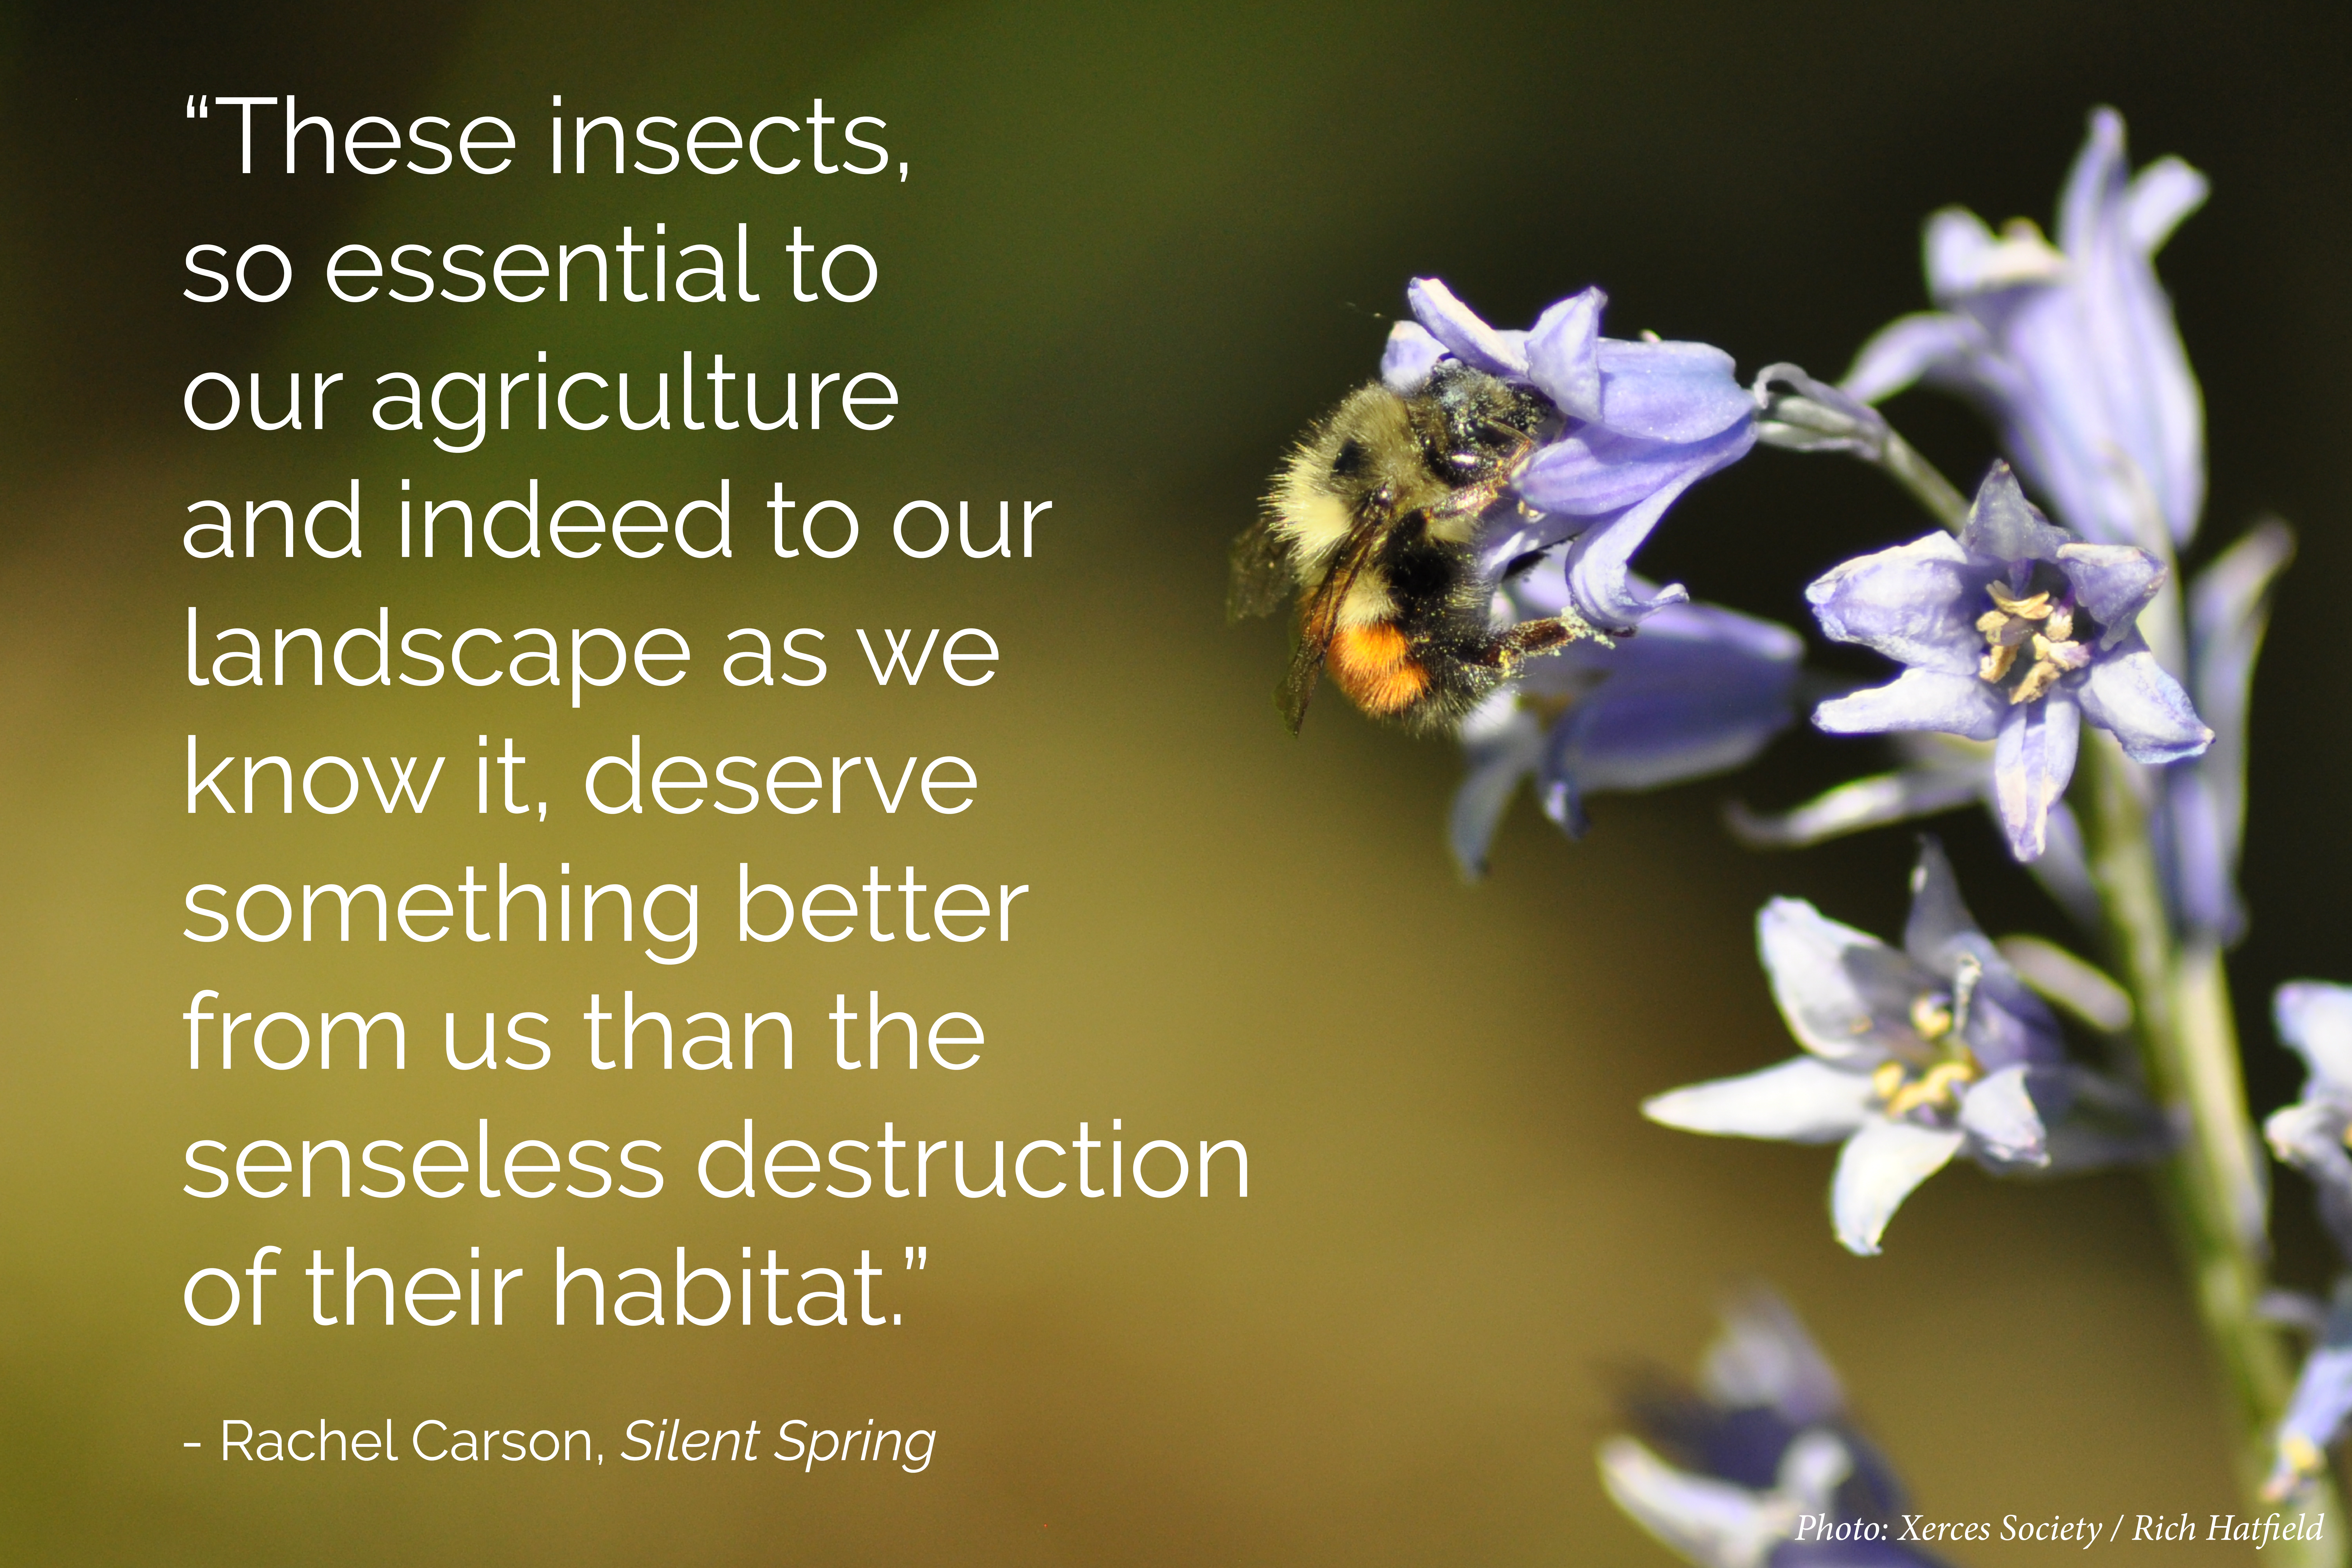 The following Rachel Carson quote is layered over a photo of a bumble bee: “These insects, so essential to our agriculture and indeed to our landscape as we know it, deserve something better from us than the senseless destruction of their habitat.”